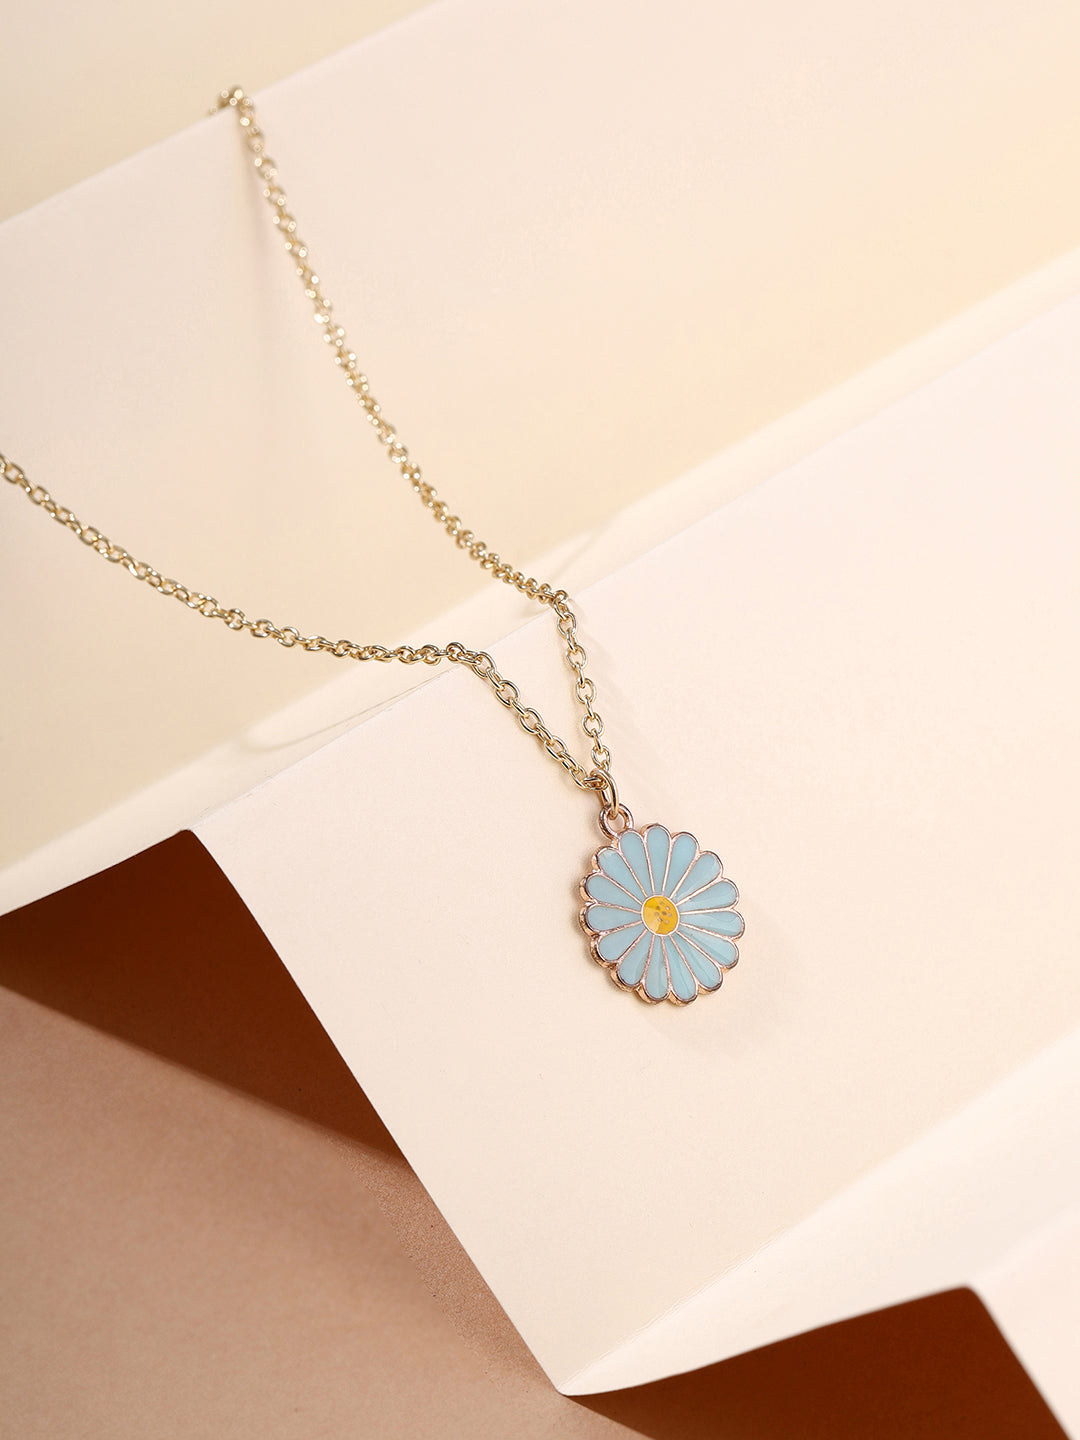 Priyaasi Blue Sunflower Pendant Gold Plated Necklace